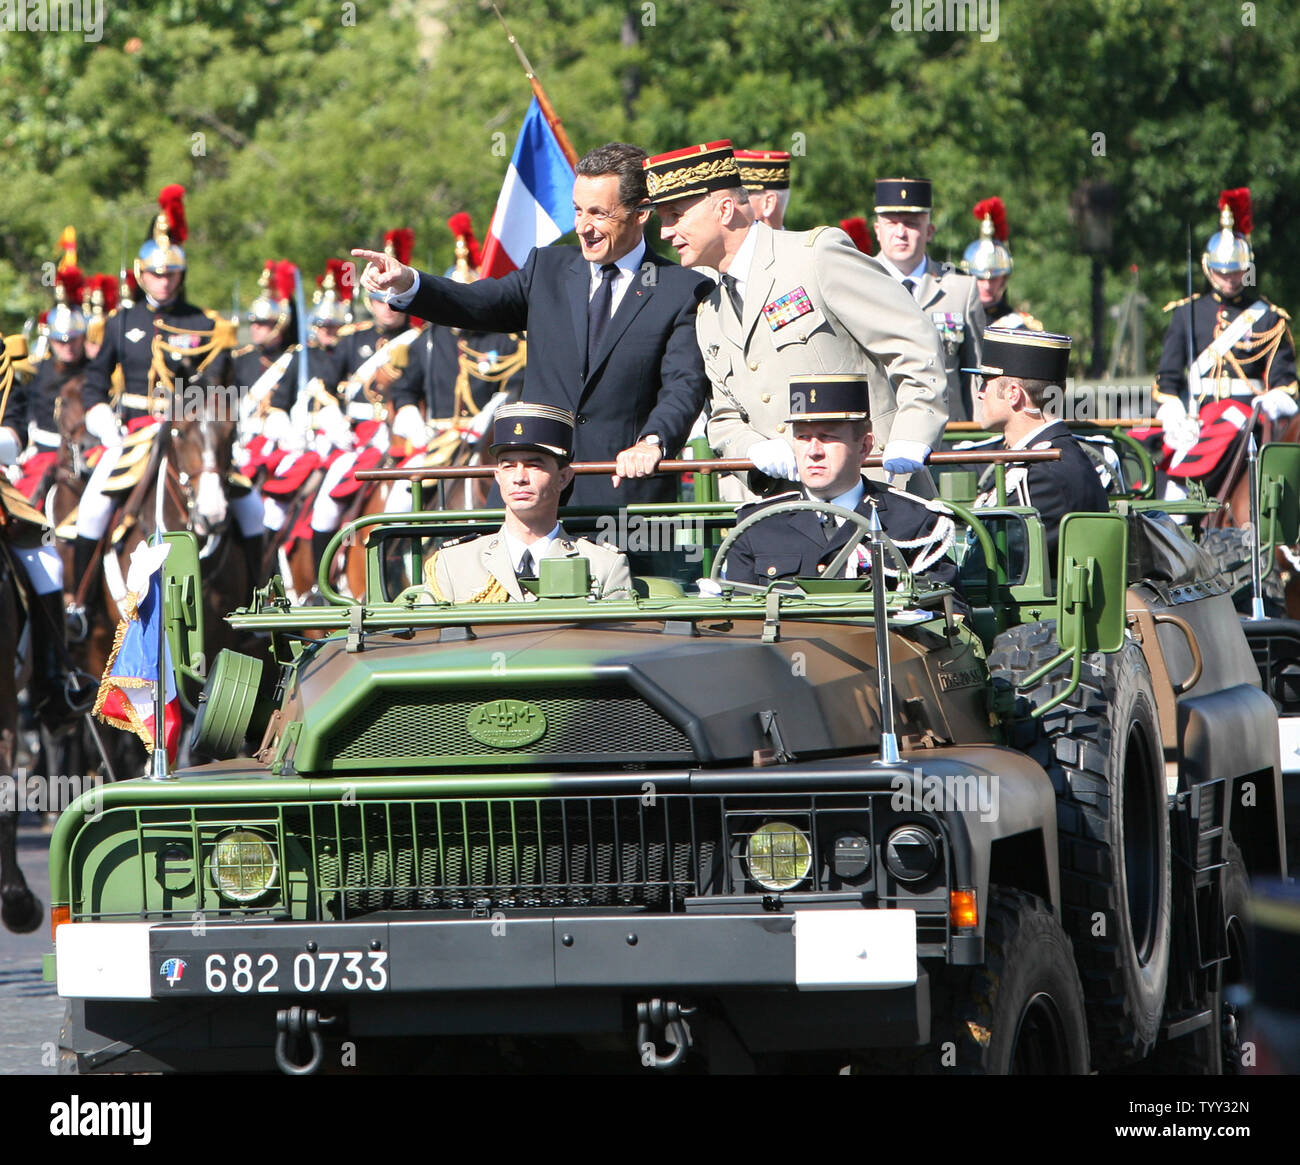 French President Nicolas Sarkozy (left) and French Army Chief of Staff General Jean Louis Georgelin ride down the Avenue des Champs-Elysees during the annual Bastille Day in Paris on July 14, 2008.   (UPI Photo/ David Silpa) Stock Photo